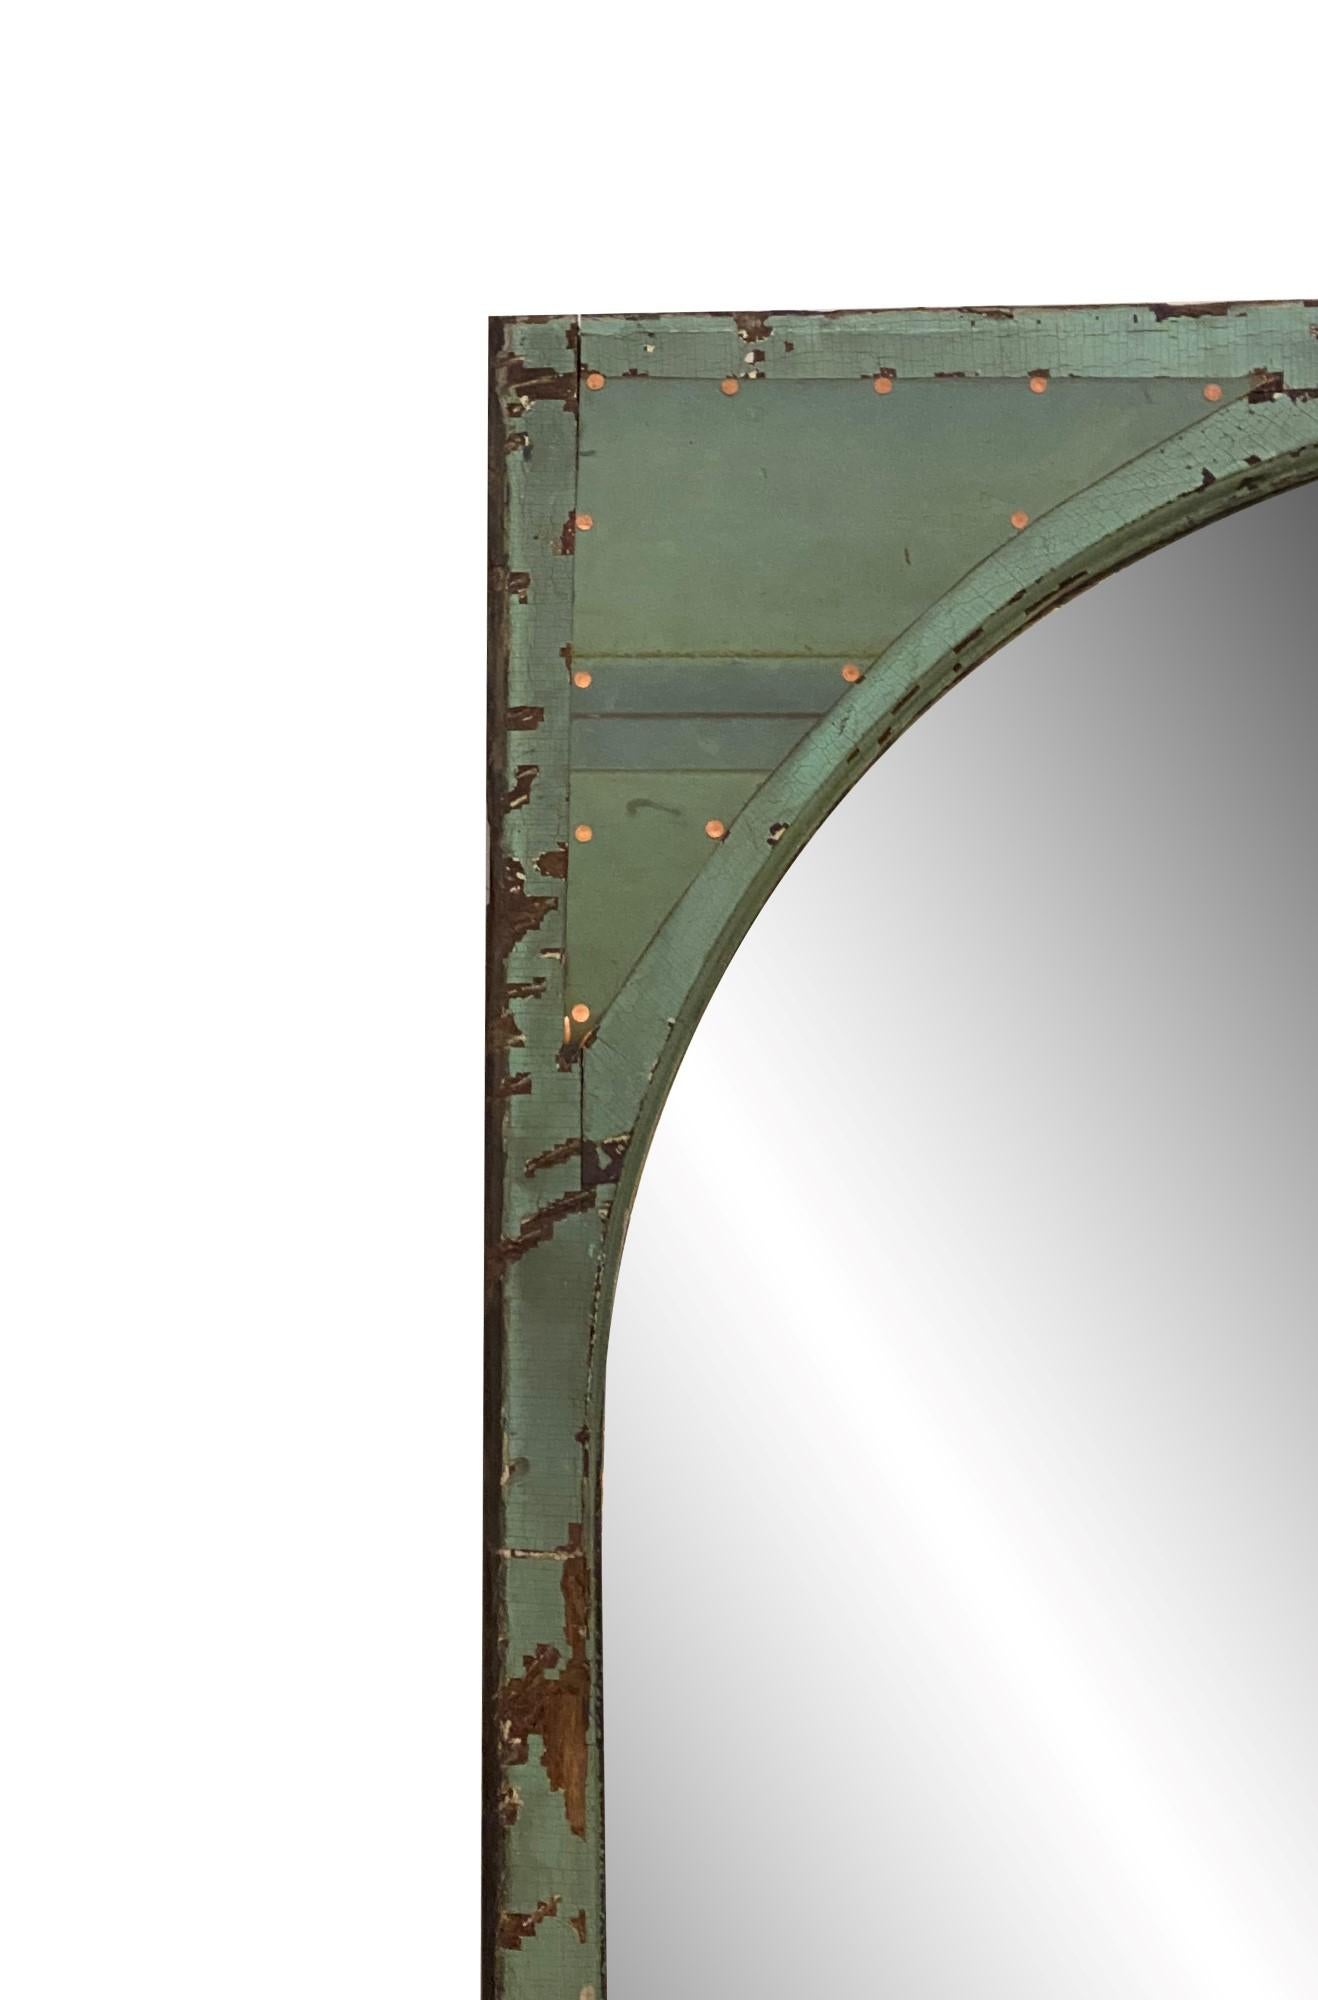 Antique early 20th century upper sash window. Original crackle paint and patinaed copper detail in corners. We have only added a new mirror to the window frame, making it an authentic, repurposed, Altered Antique. This can be seen at our 333 West